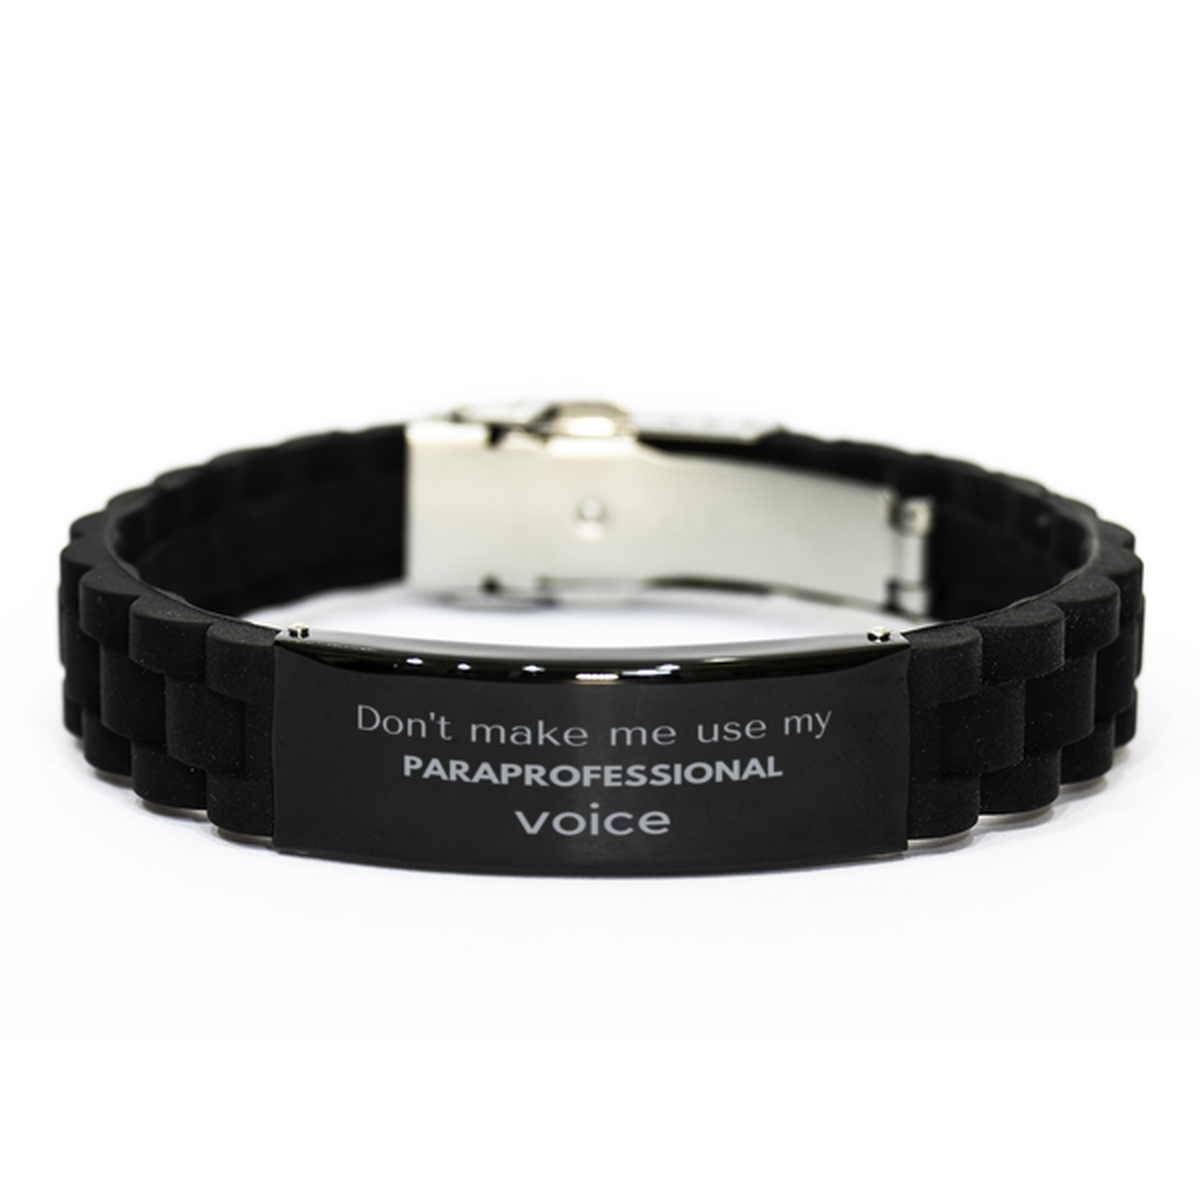 Don't make me use my Paraprofessional voice, Sarcasm Paraprofessional Gifts, Christmas Paraprofessional Black Glidelock Clasp Bracelet Birthday Unique Gifts For Paraprofessional Coworkers, Men, Women, Colleague, Friends